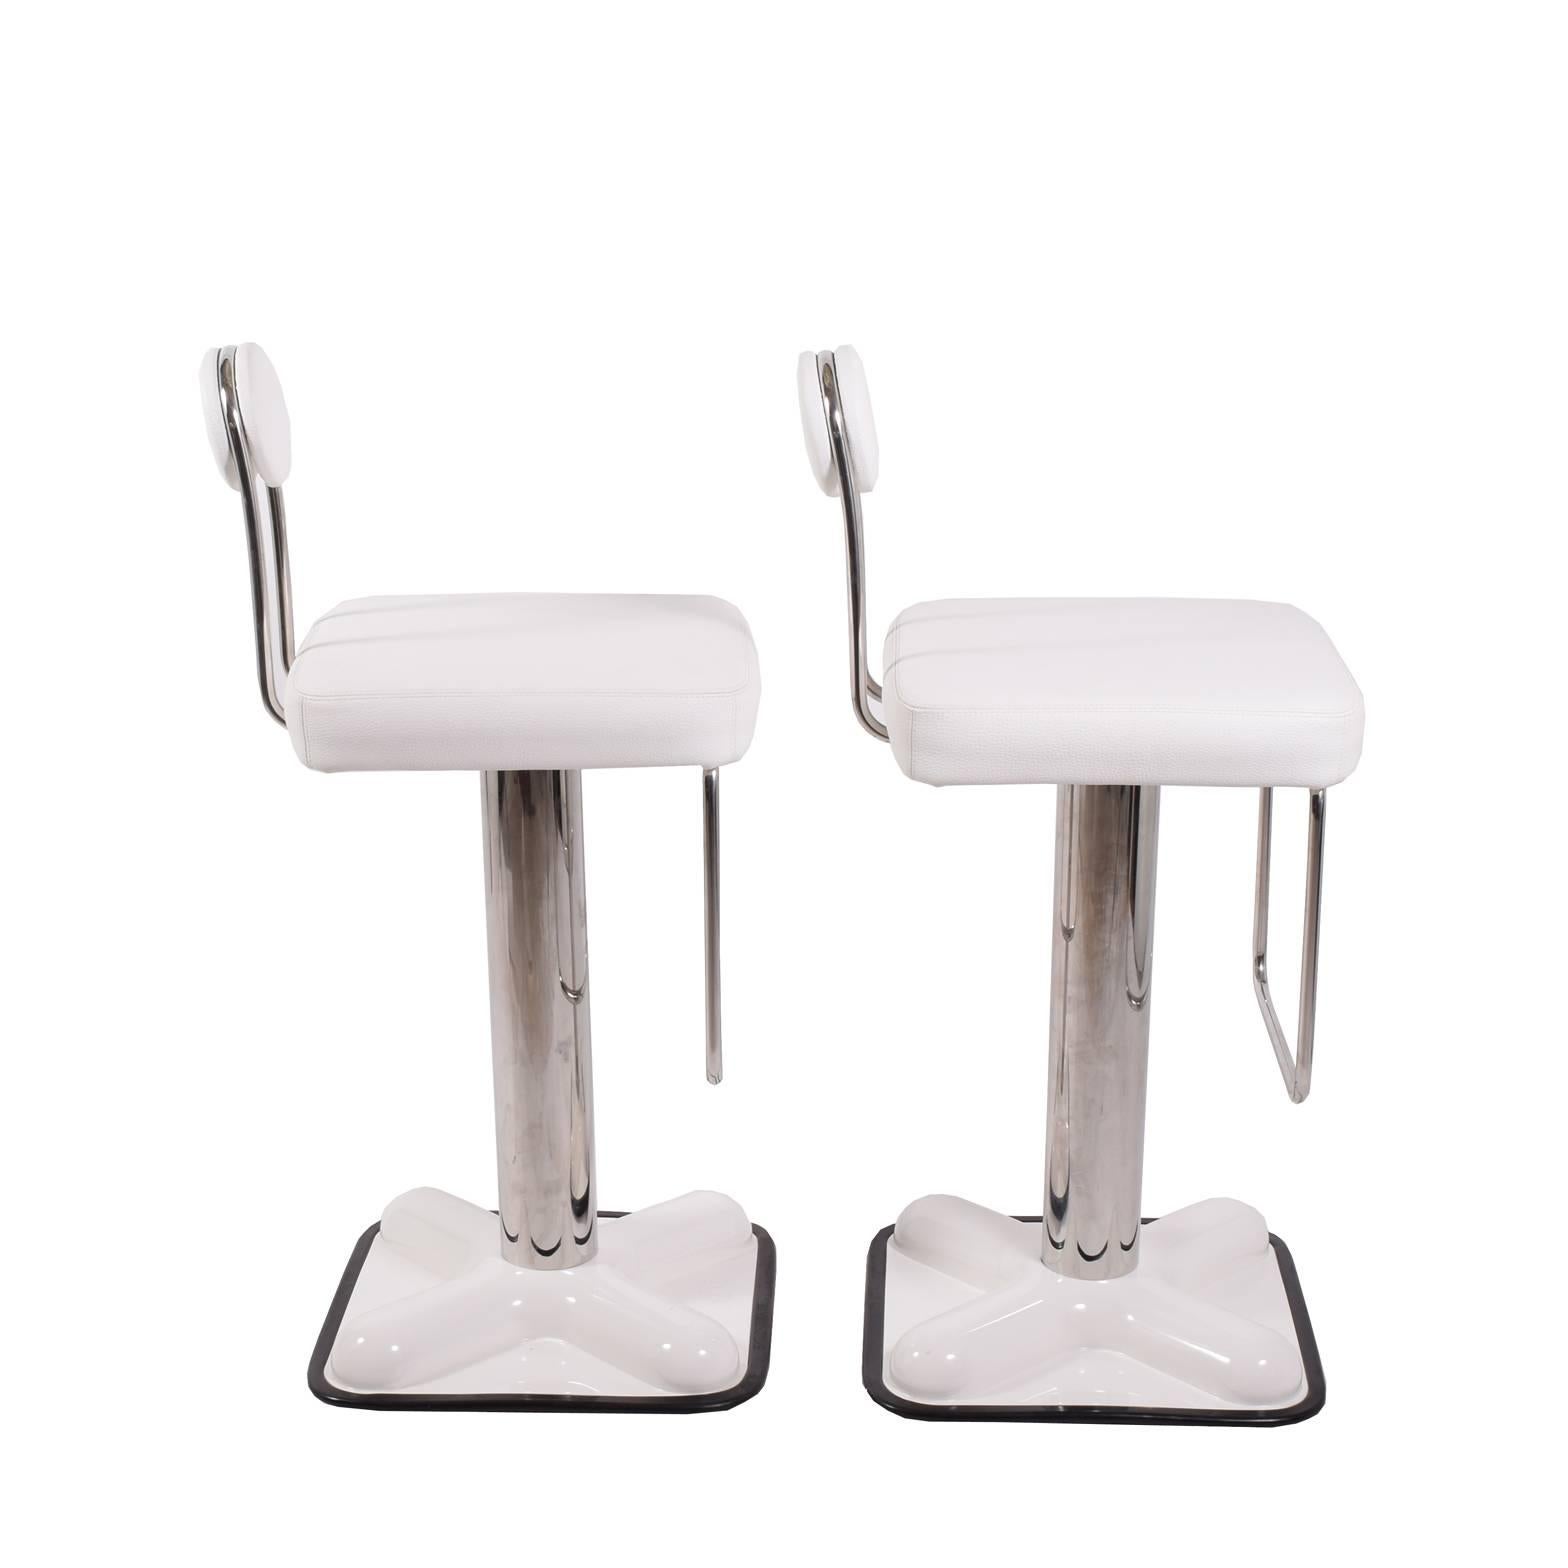 Pair bar stools design in 1971 mfg. Zanotta white leather upholstery.
It was awarded the golden medal at the International Exhibition M.I.A in 1972. It is also exhibited in several museums worldwide permanent collection: Kunstgewerbemuseum, Zürich